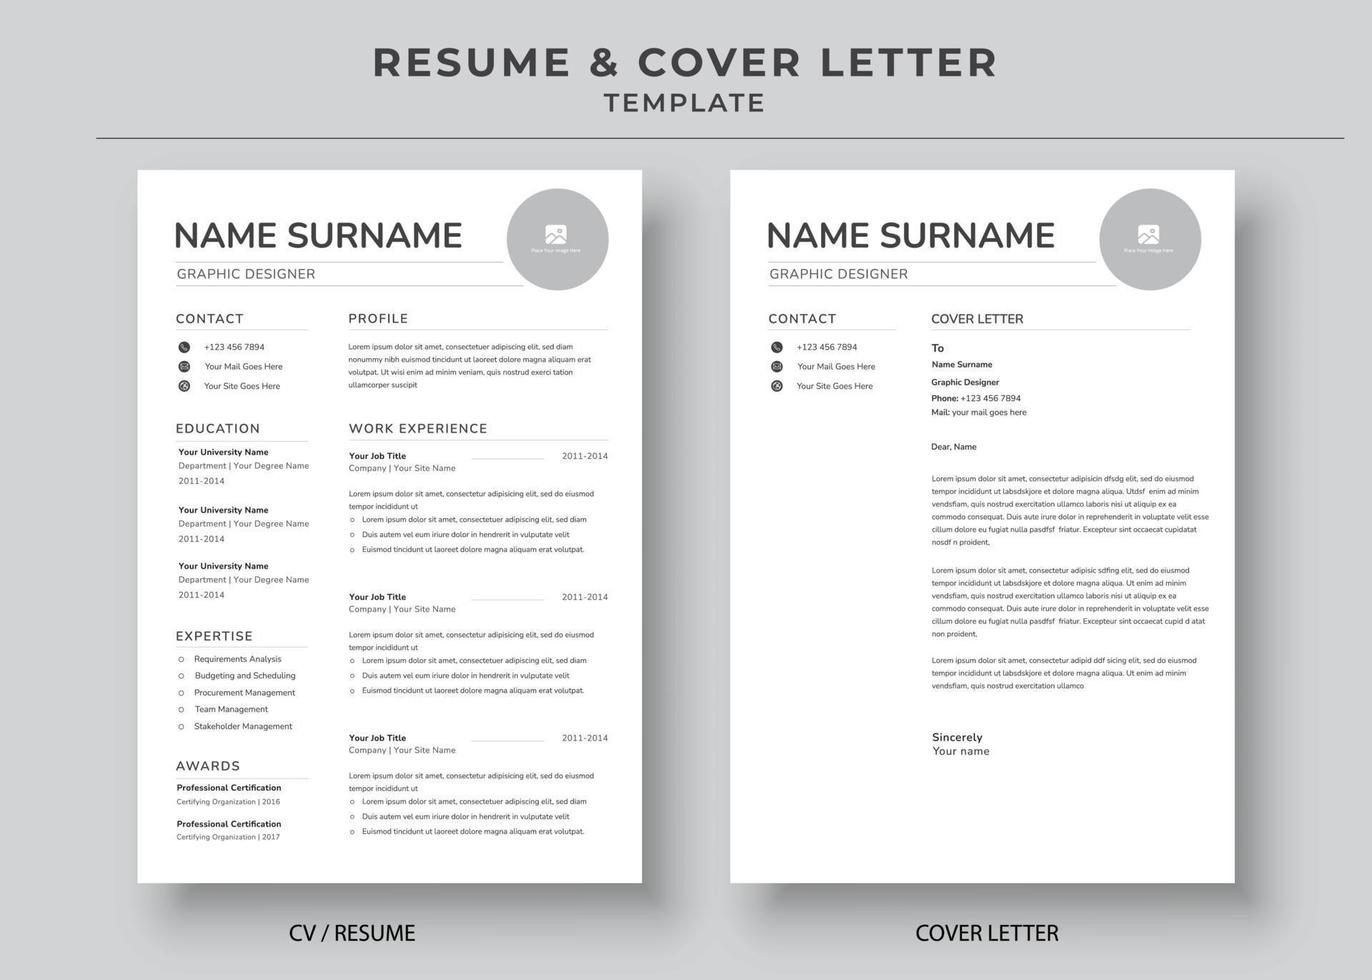 Resume and Cover Letter Template, Minimalist resume cv template, Cv professional jobs resumes vector